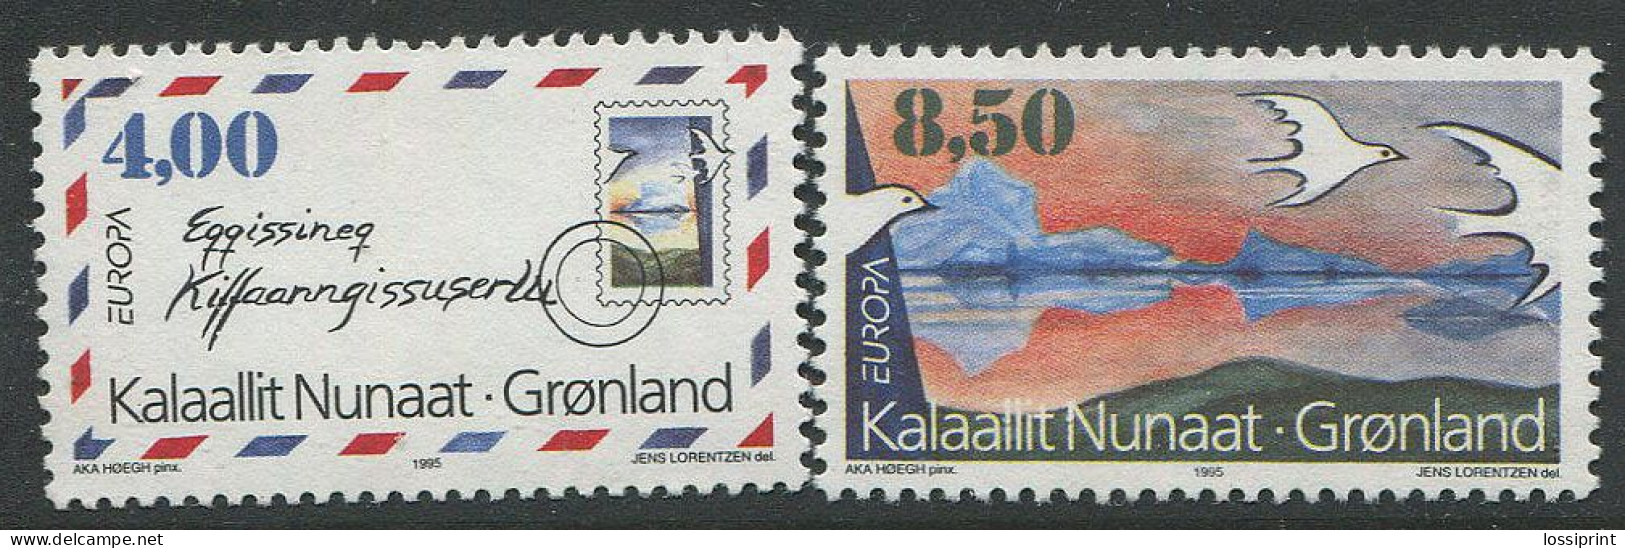 Gronland:Greenland:Unused Stamps EUROPA Cept 1995, MNH - 1995